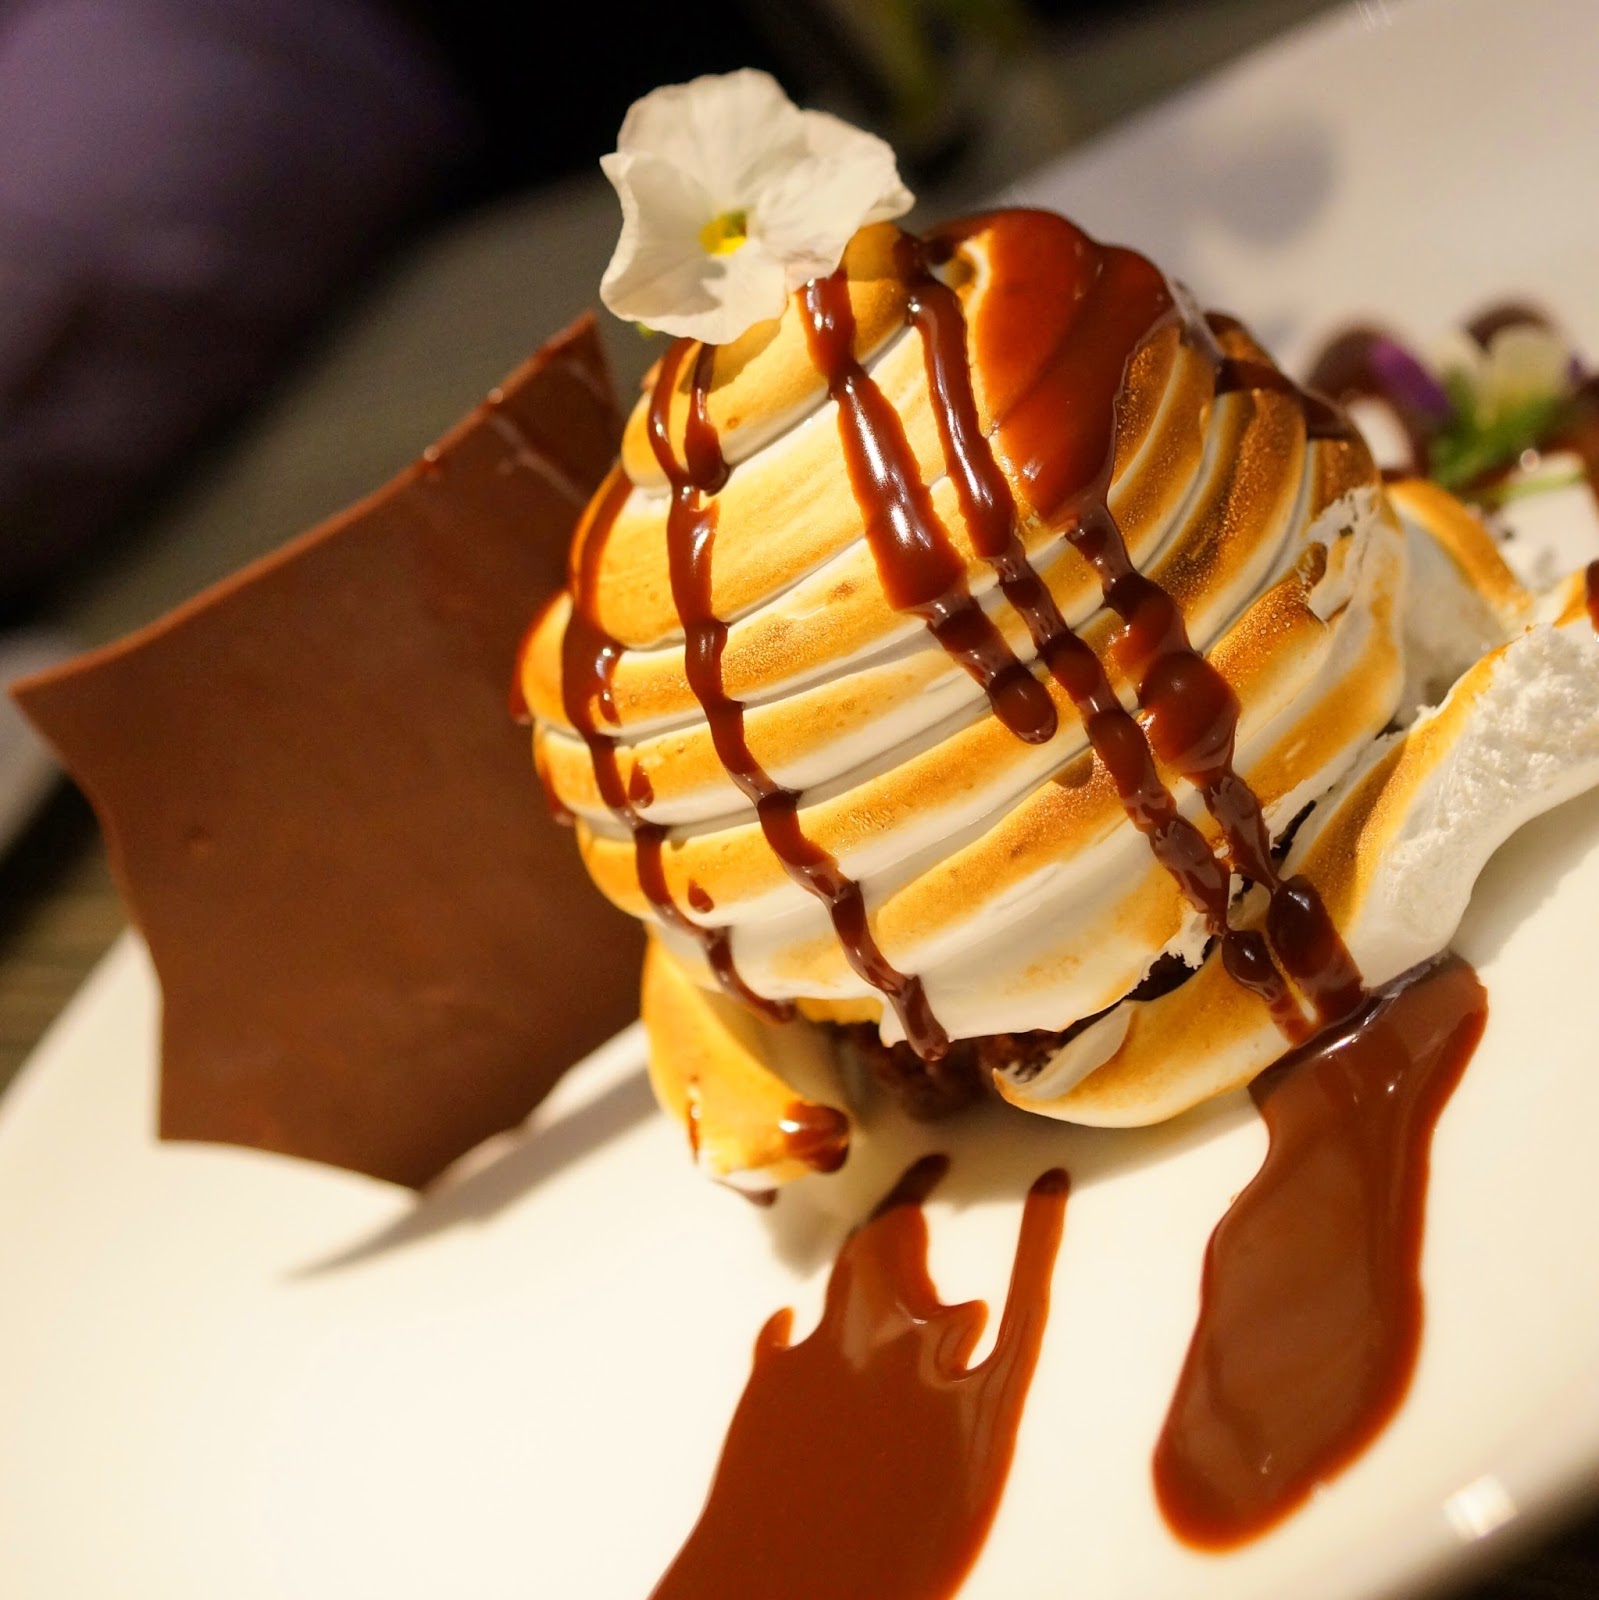 Baked Alaska Dessert, from Salsipuedes, Panama